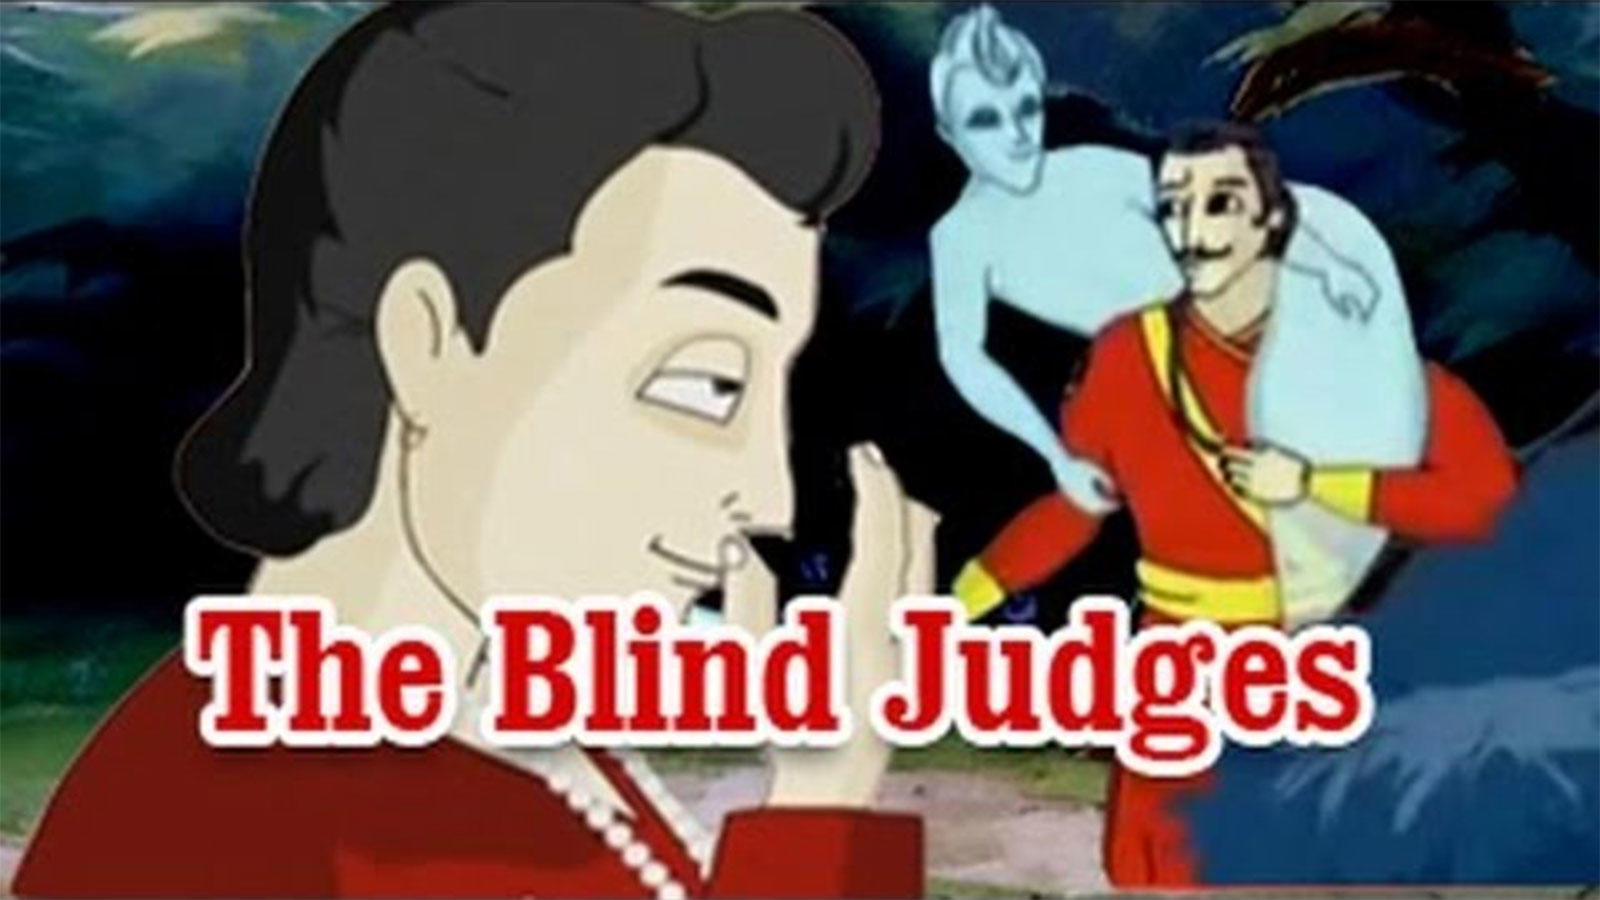 Watch Popular Kids English Nursery Story 'Vikram Betal - The Blind Judges'  for Kids - Check Out Children's Nursery Stories, Baby Songs, Fairy Tales In  English | Entertainment - Times of India Videos